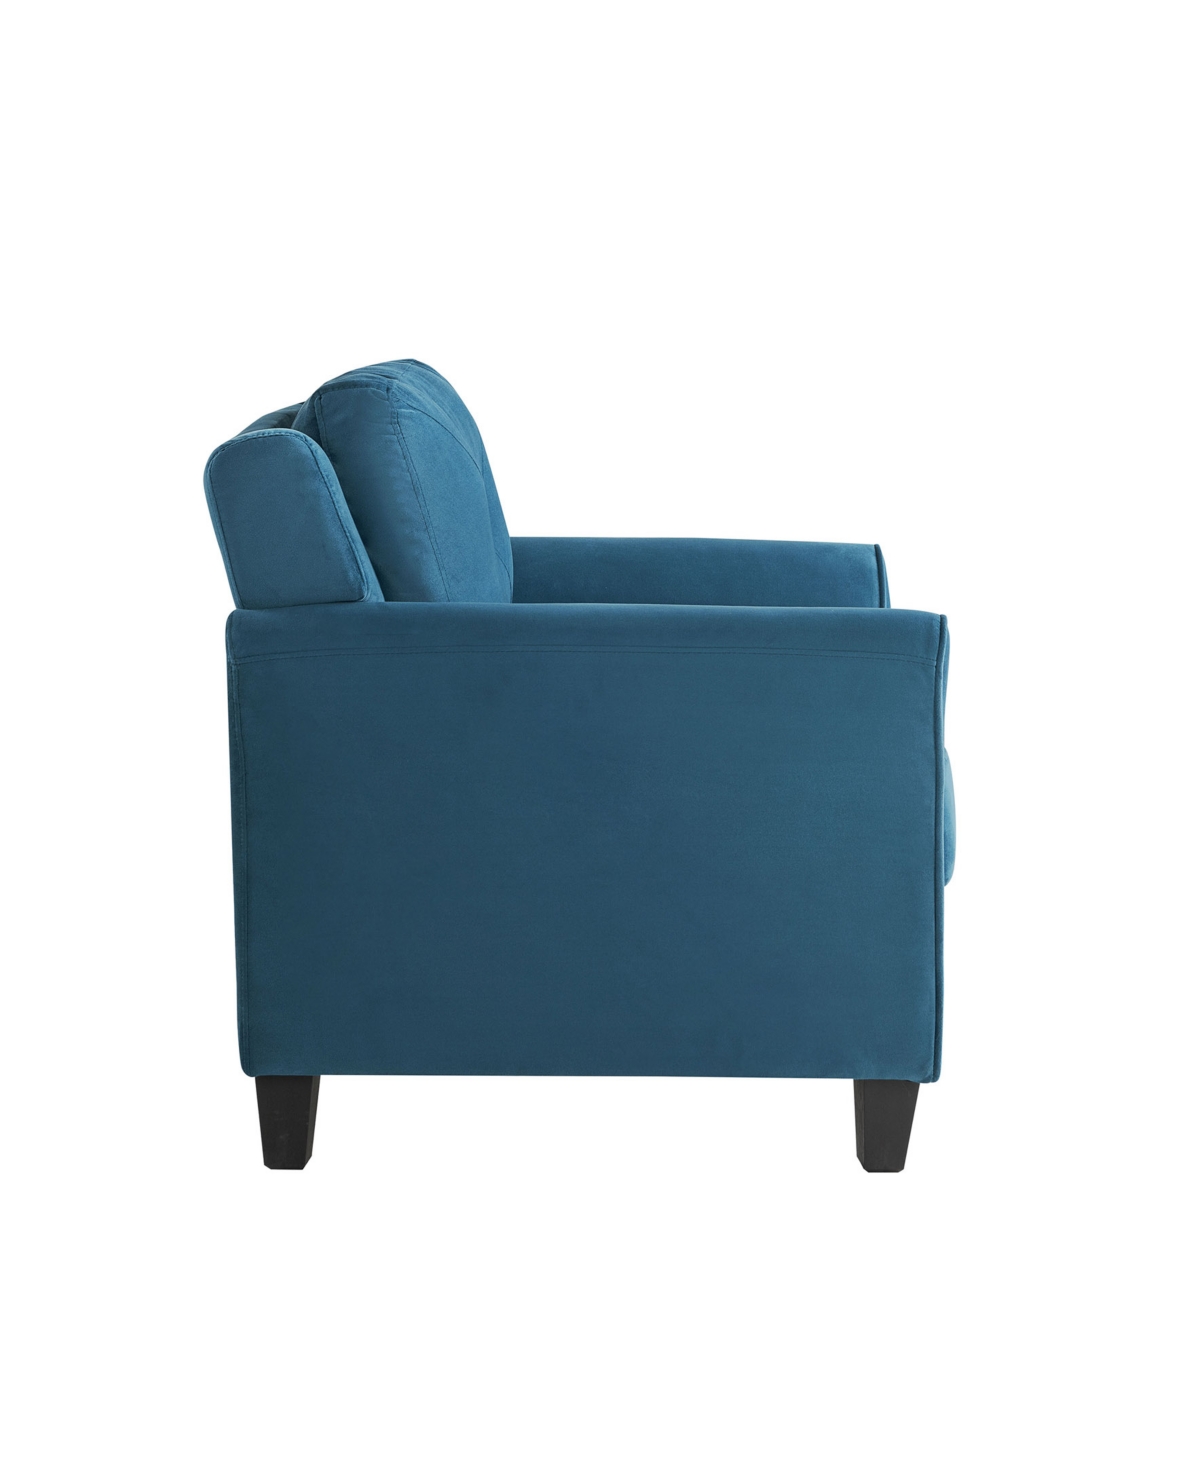 Shop Lifestyle Solutions 33.9" W Polyester Harvard Chair With Curved Arms In Blue